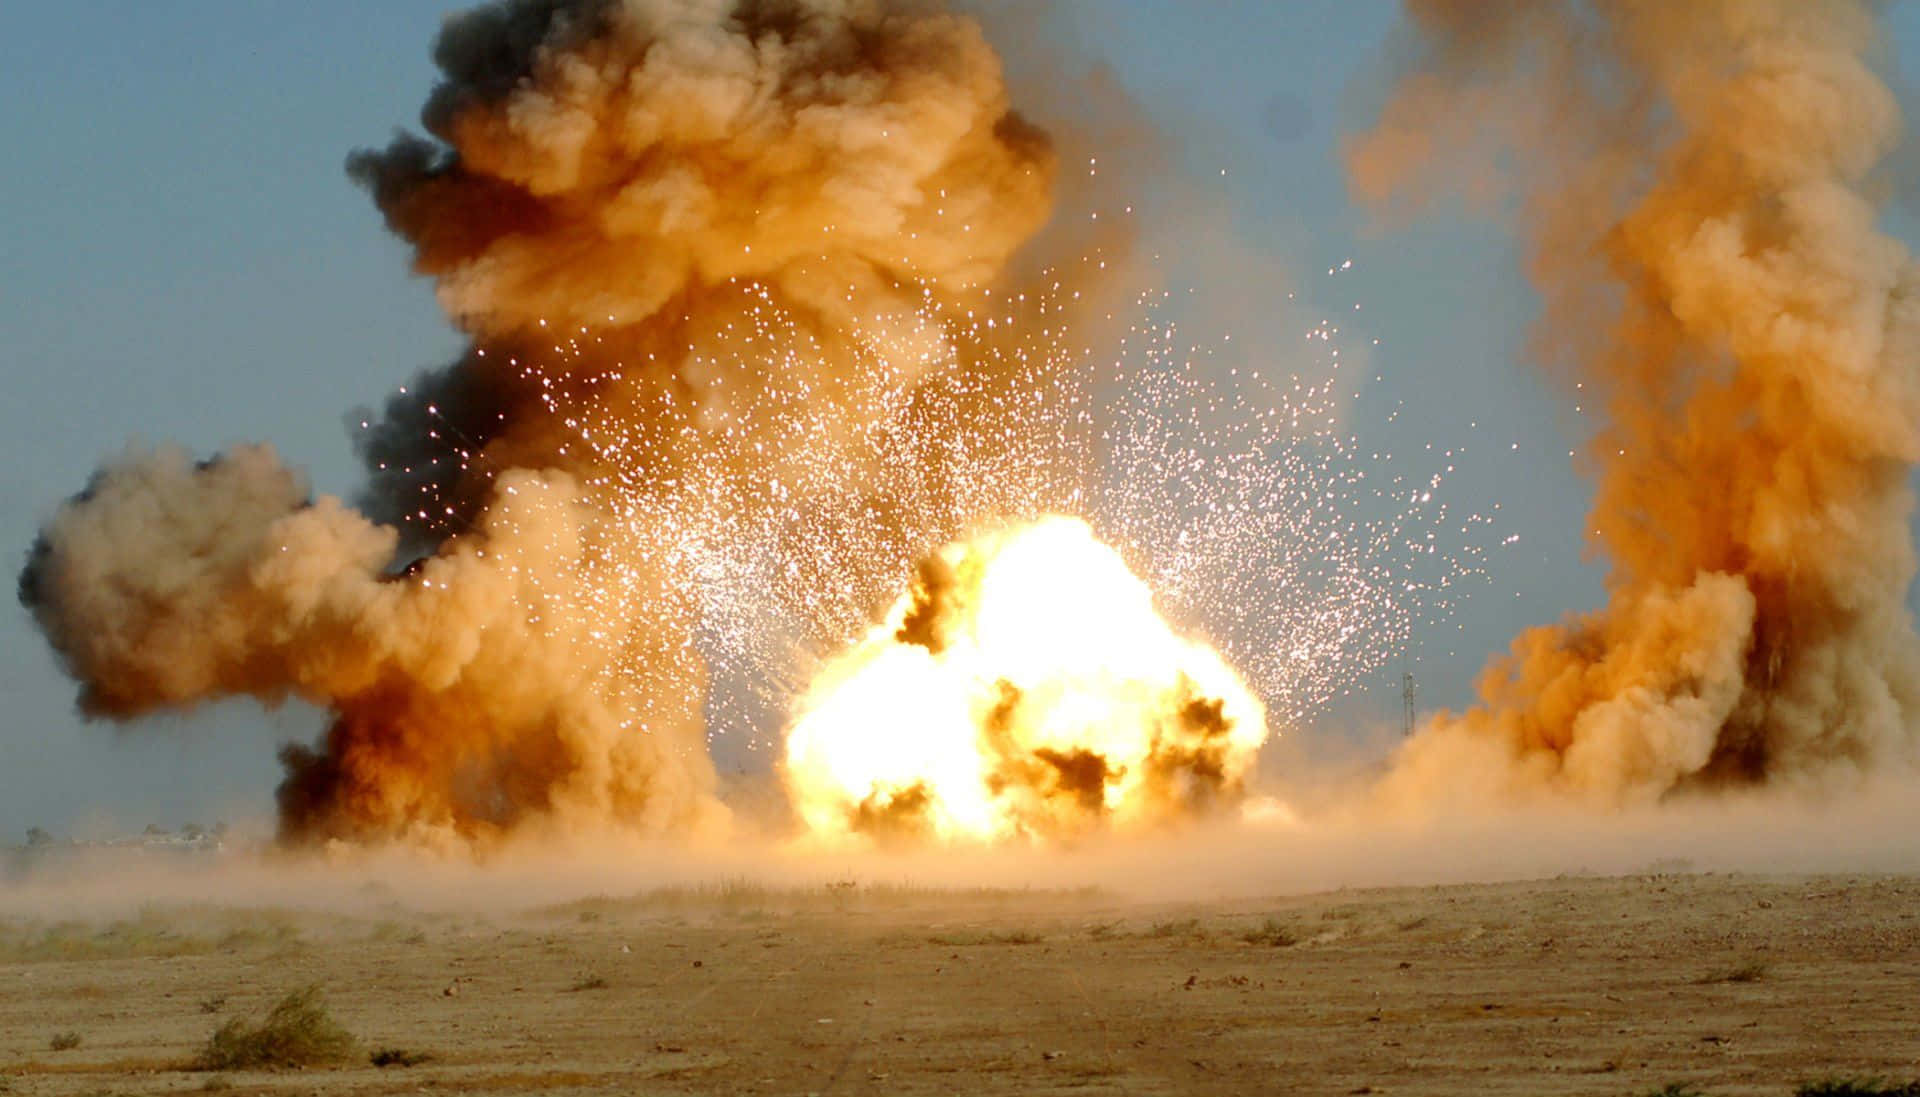 A Large Explosion In The Desert